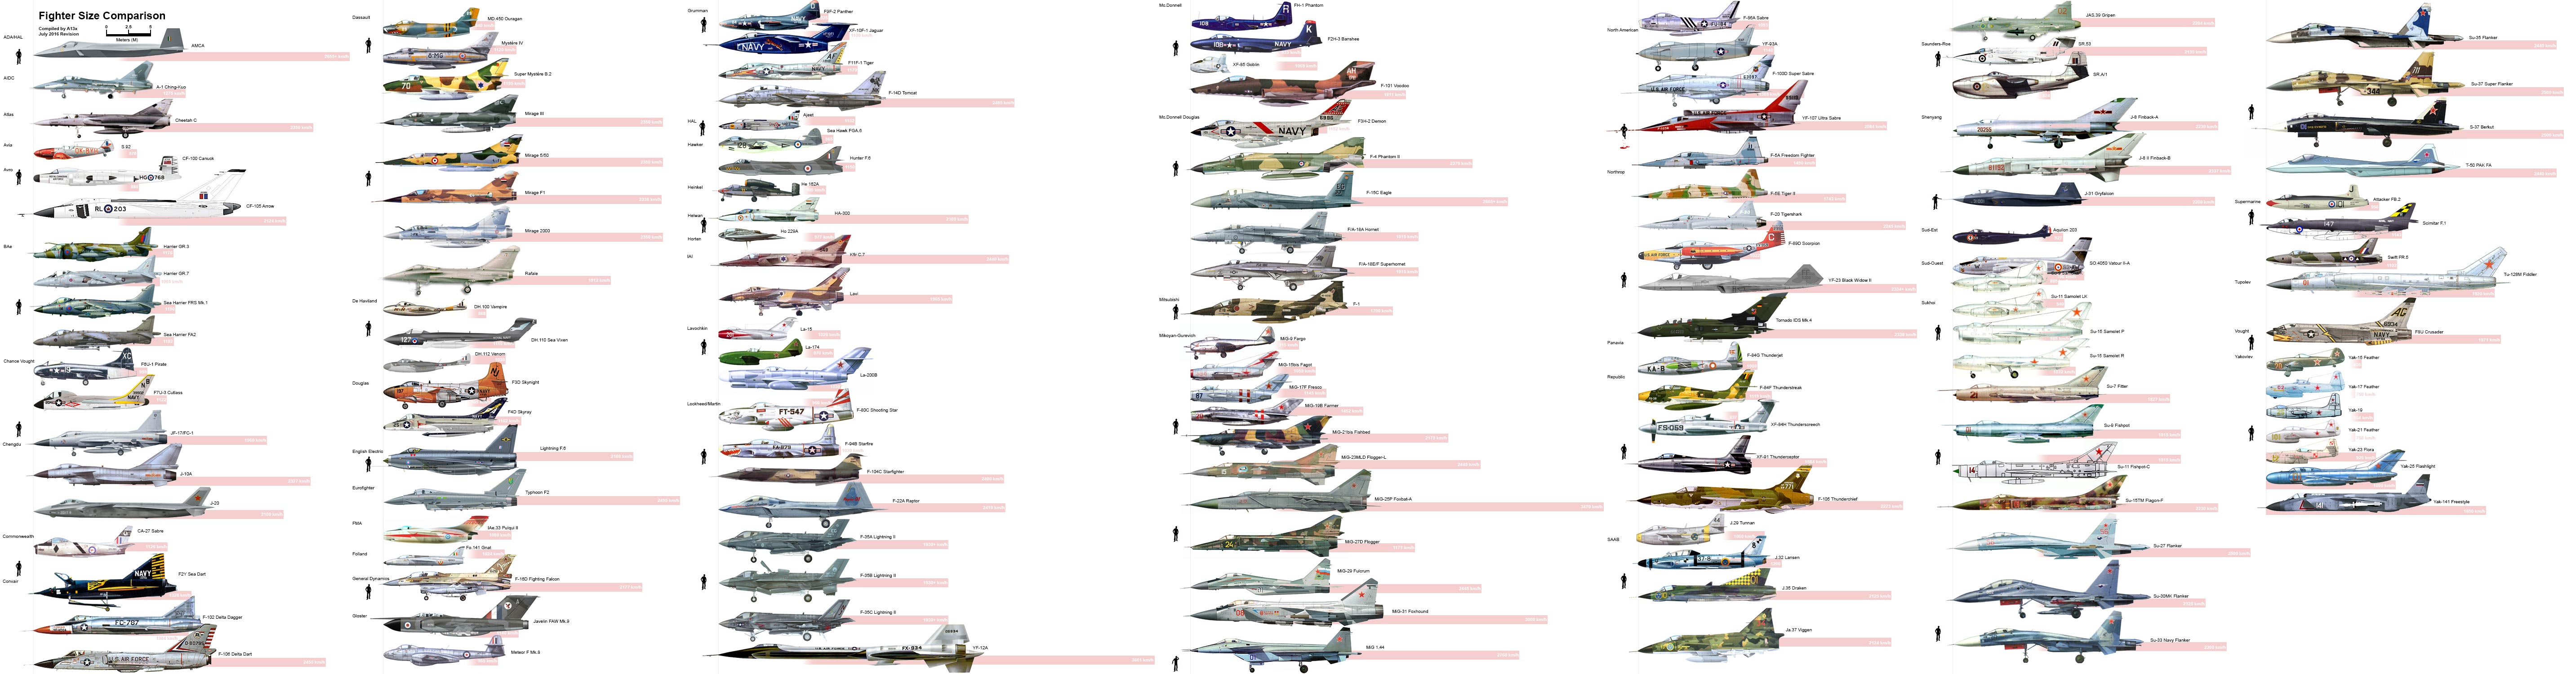 Fighter generations comparison chart - The Aviationist